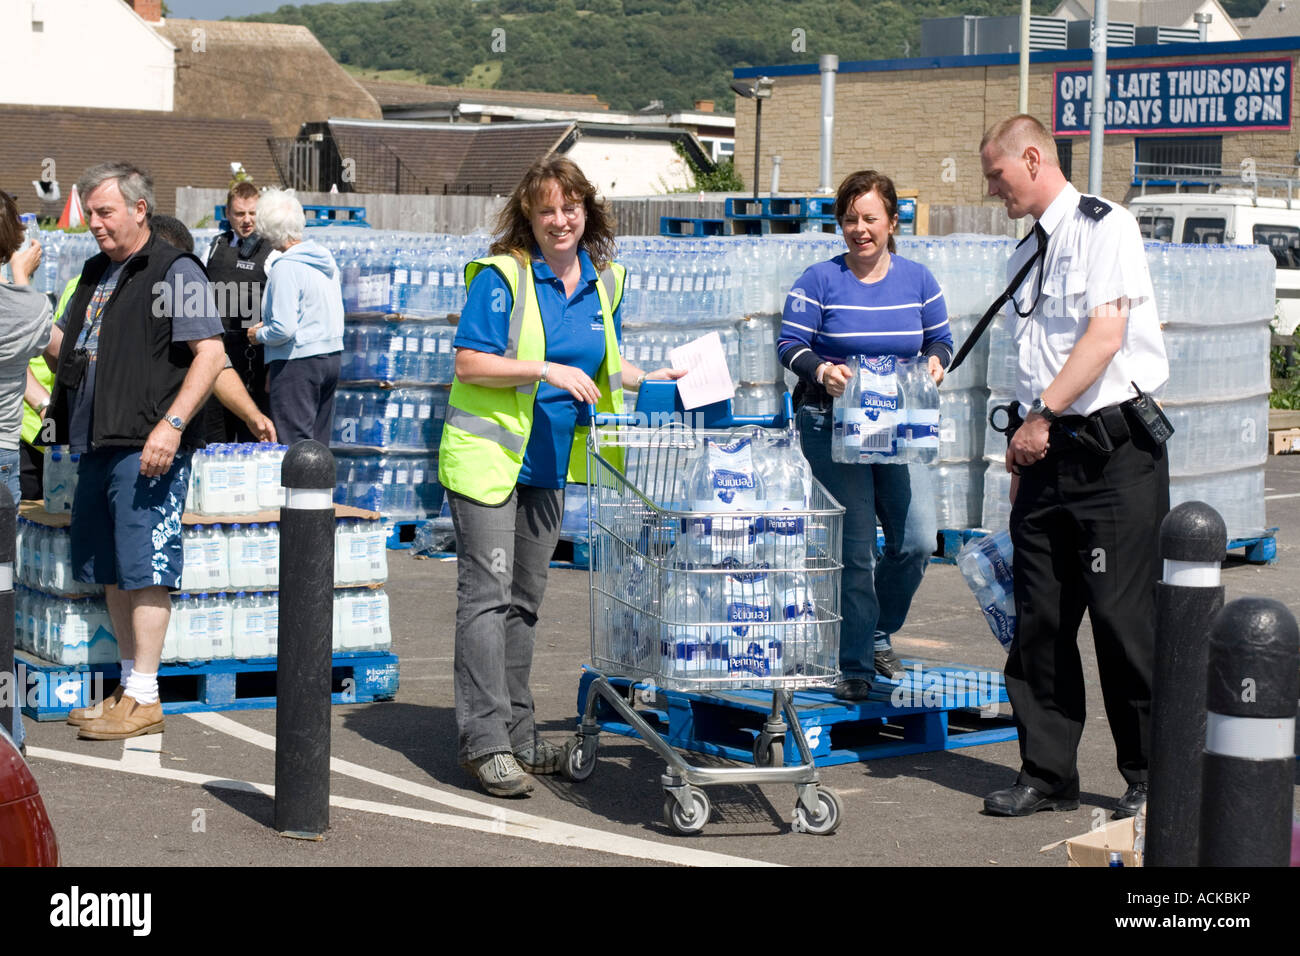 People collecting free bottled water from Tesco car park Bishops Cleeve UK with police on duty Stock Photo